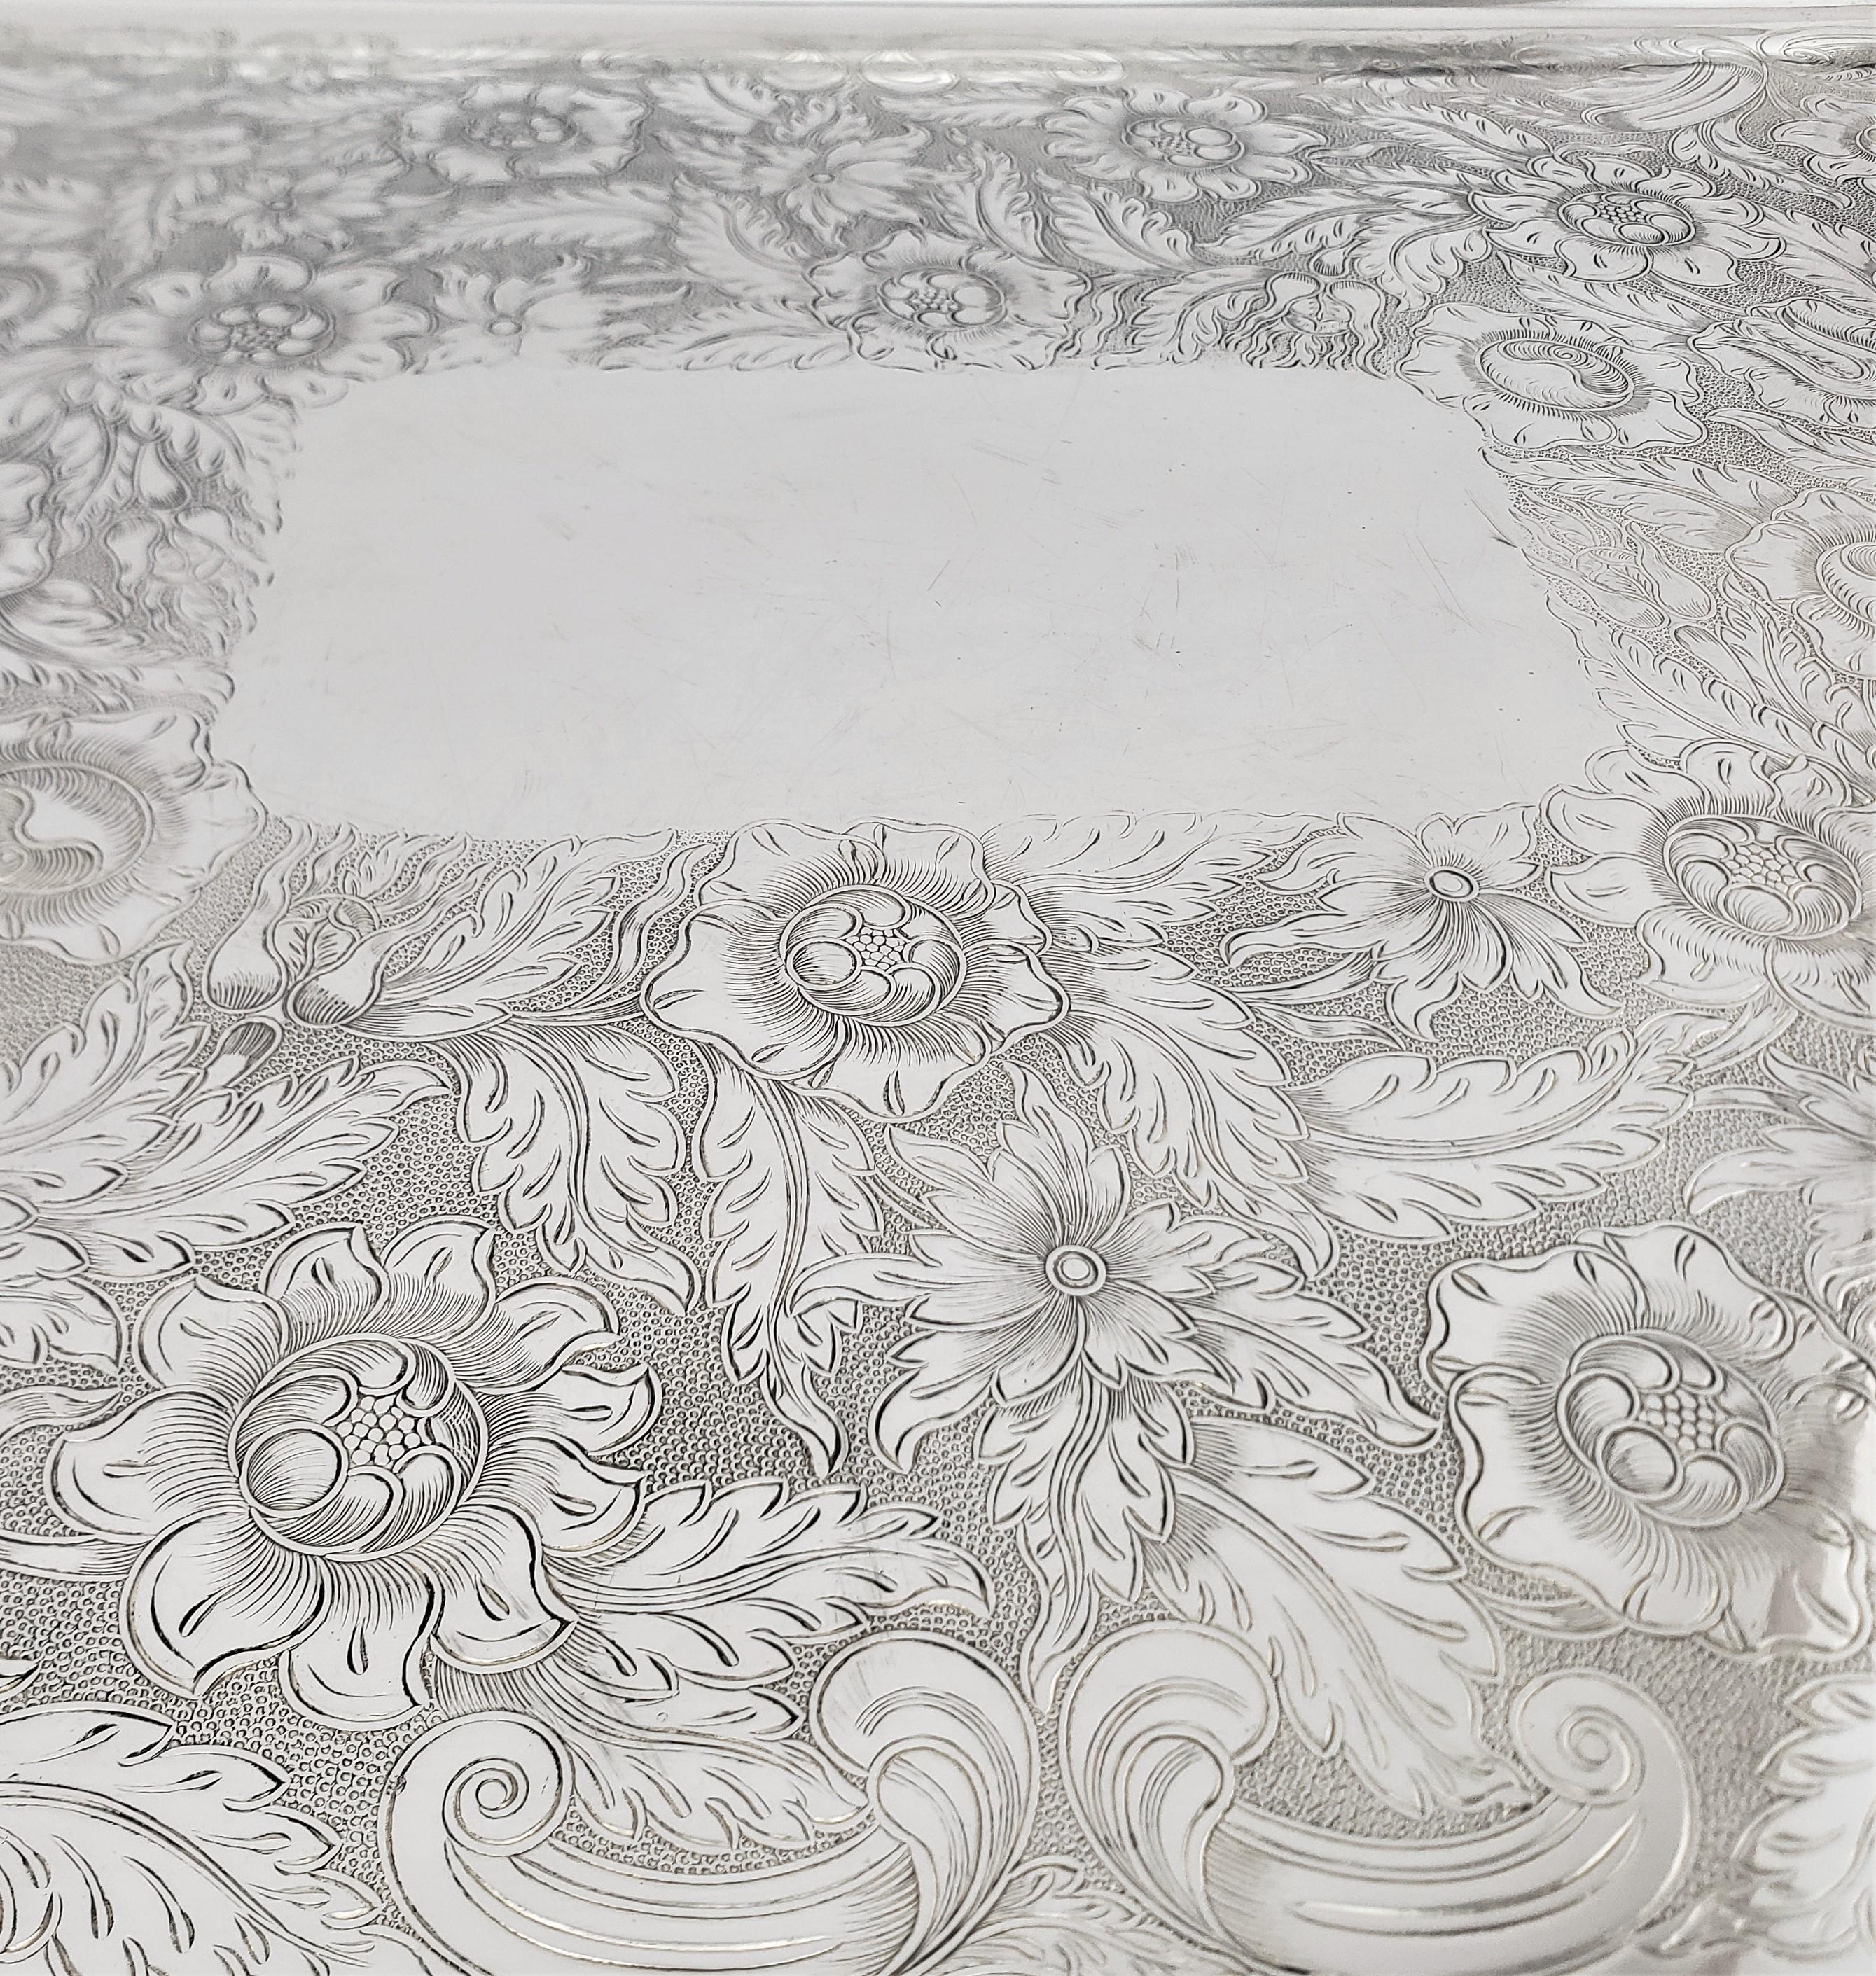 Antique Birks Large Silver Plated Rectangular Serving Tray with Floral Engraving For Sale 3